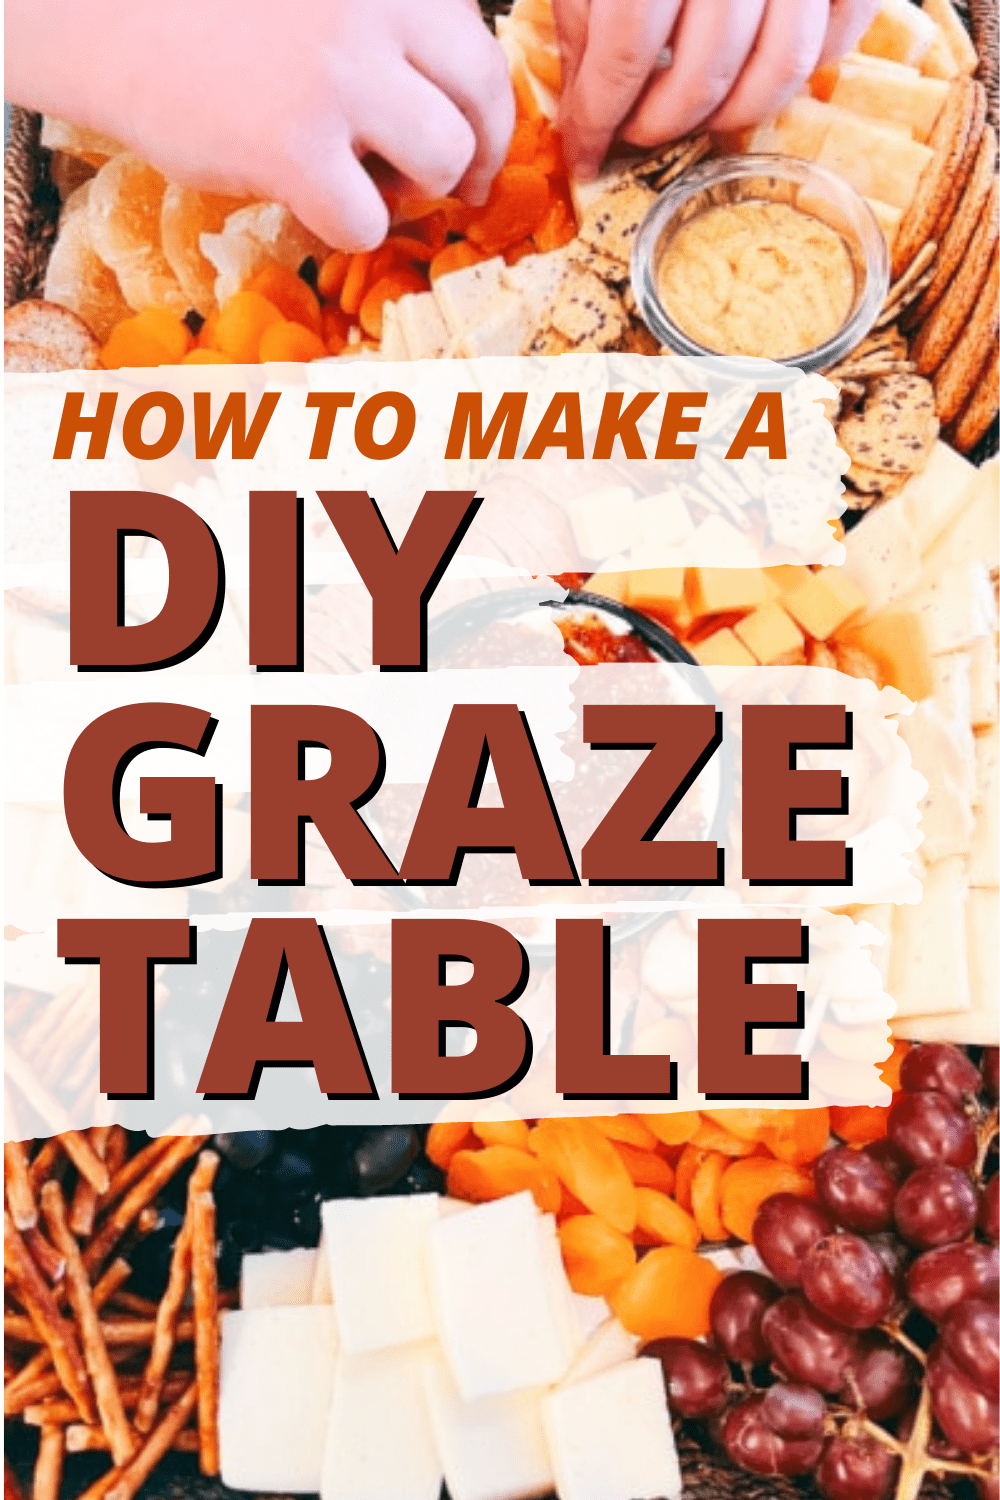 EASY DIY GRAZE TABLE graze board with meats, cheeses and fruits with a hand arranging it